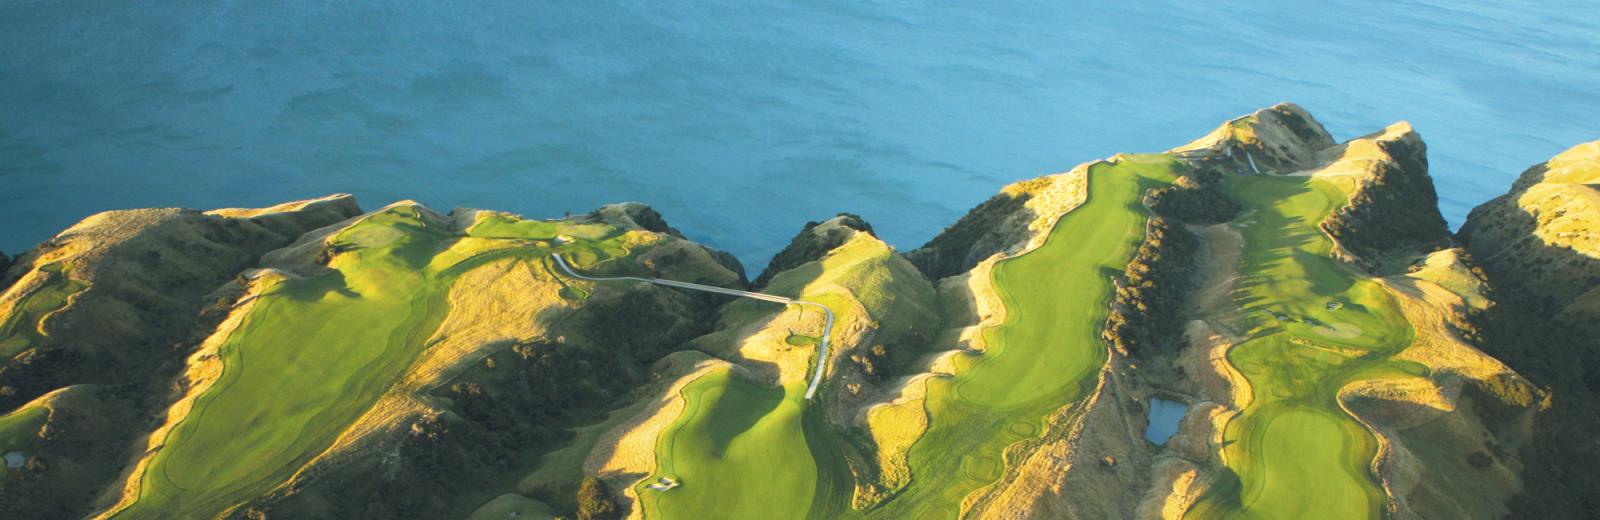 New Zealand Golf Course's